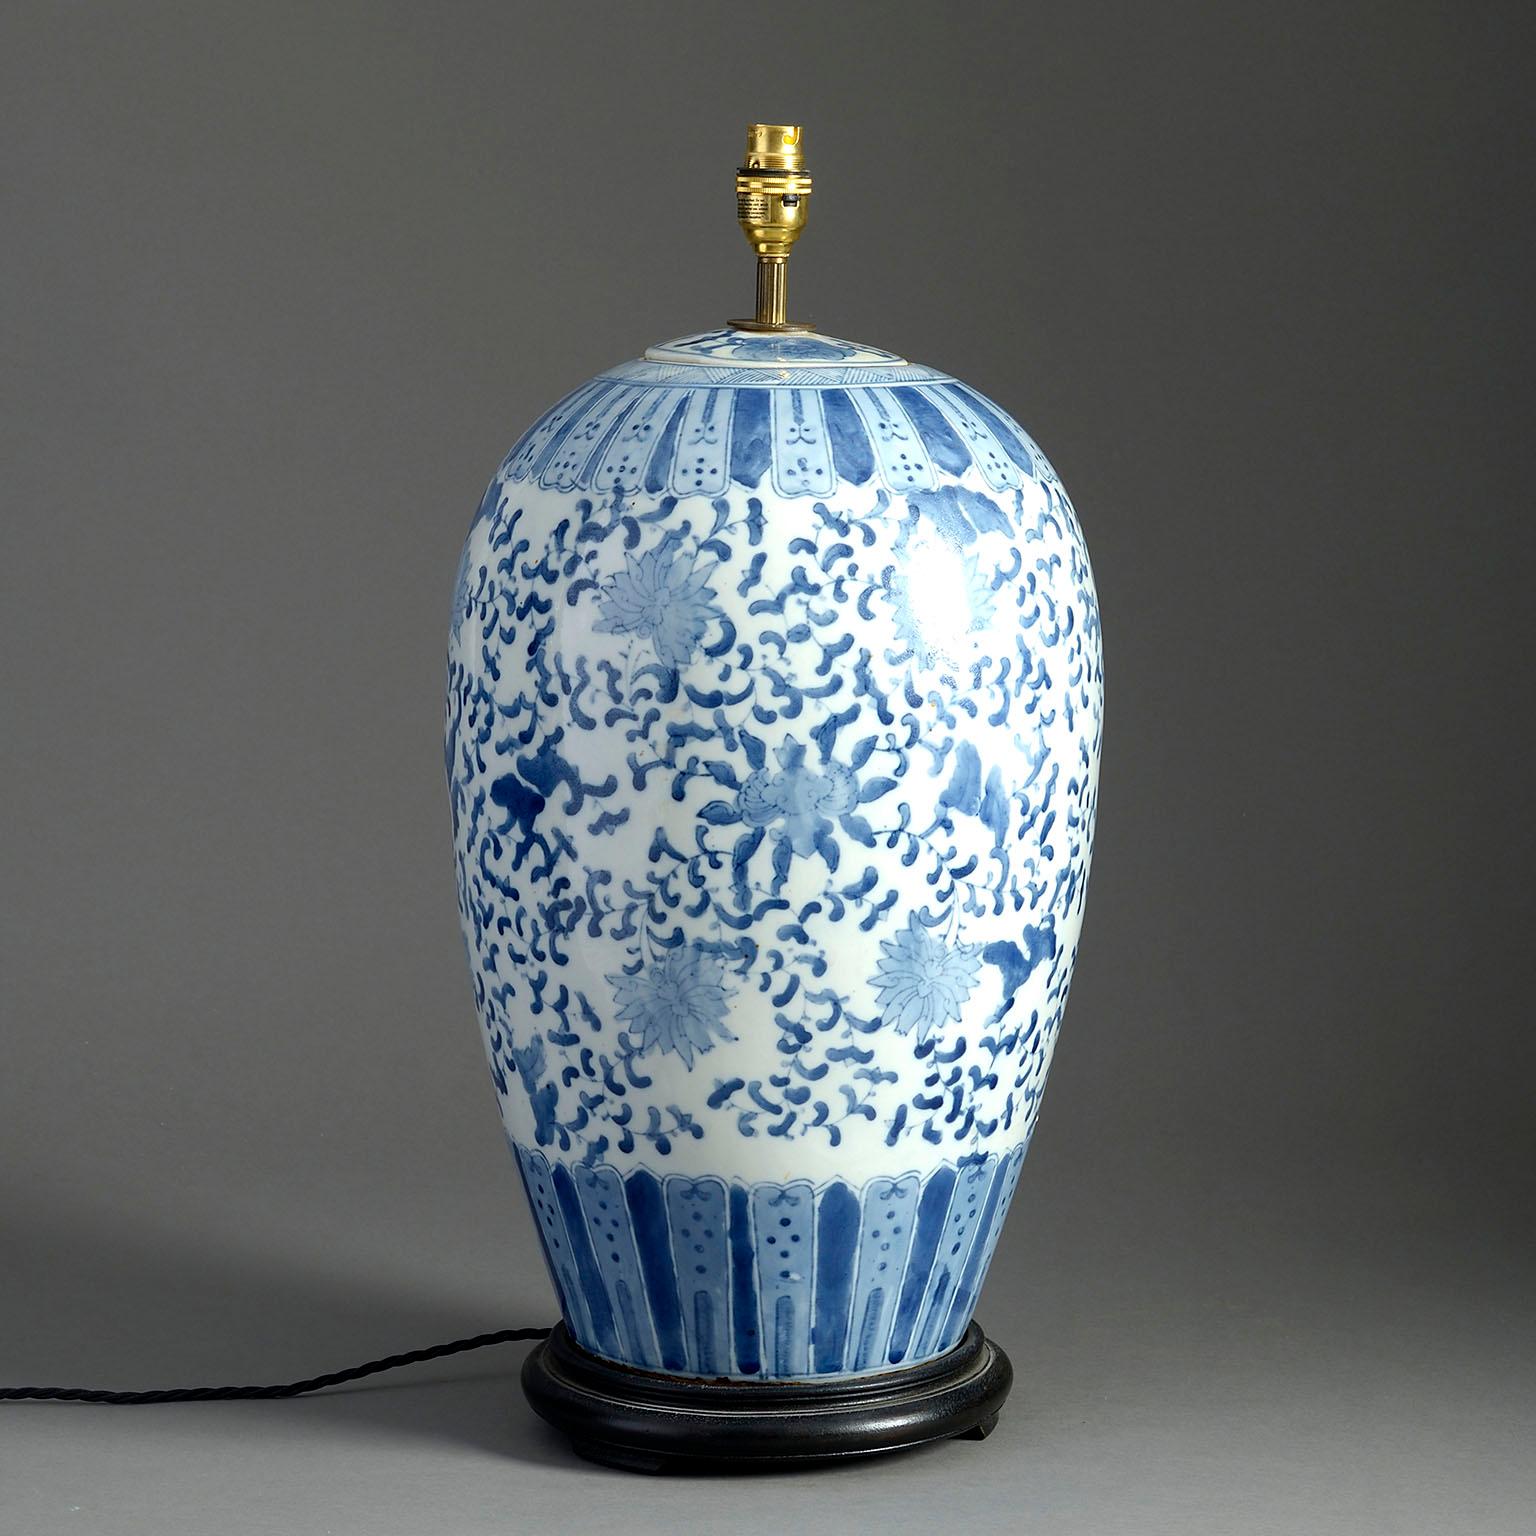 A large mid-nineteenth century blue and white glazed jar and cover, decorated throughout with flowers and foliage and now mounted as a lamp upon a turned ebonised base.

Wired to UK standards. This lamp can be re-wired to all international